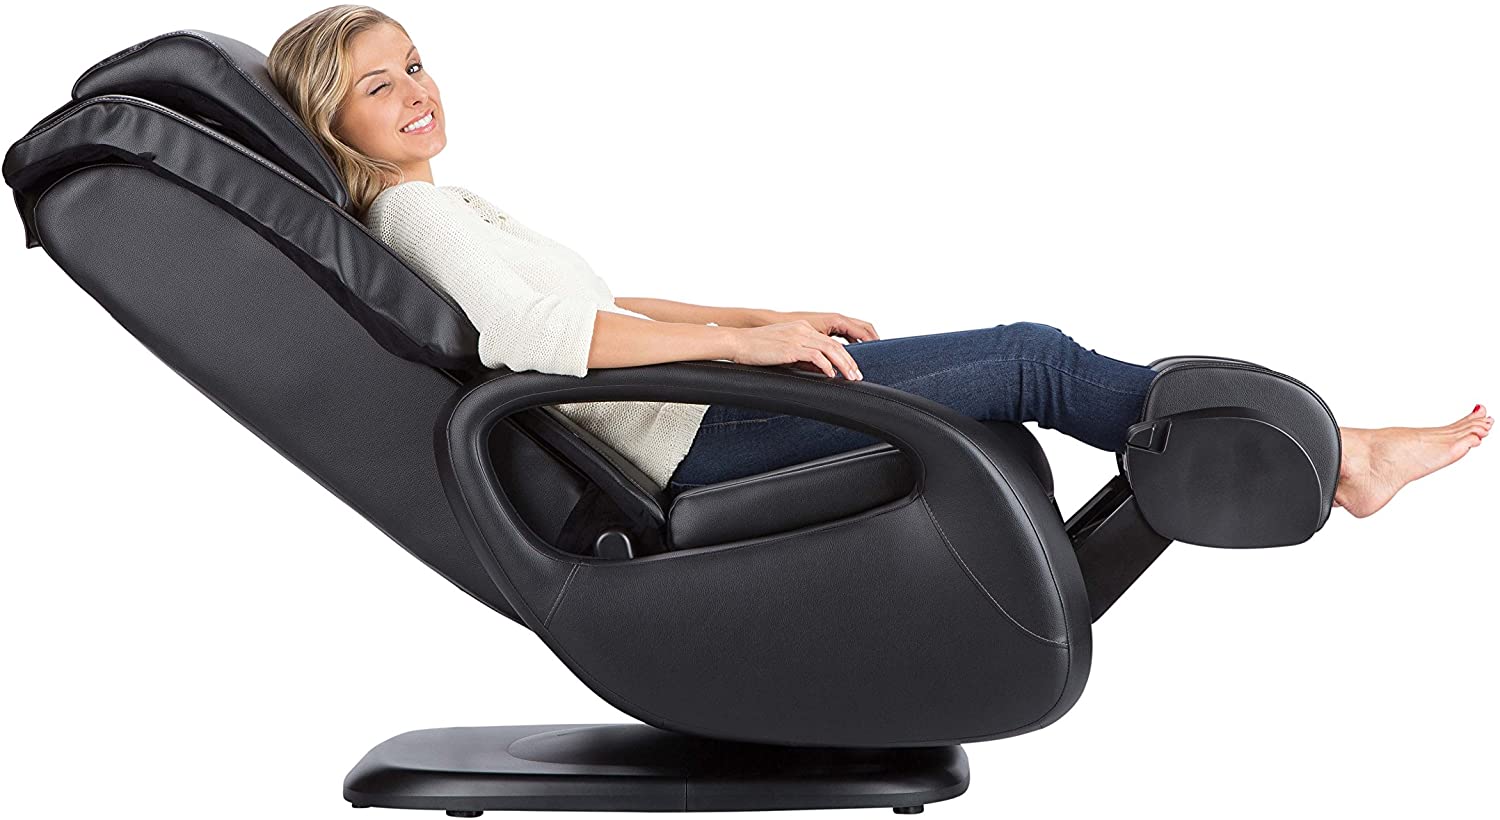 Human Touch WholeBody 7.1 Warm Air Technology Massage Chair